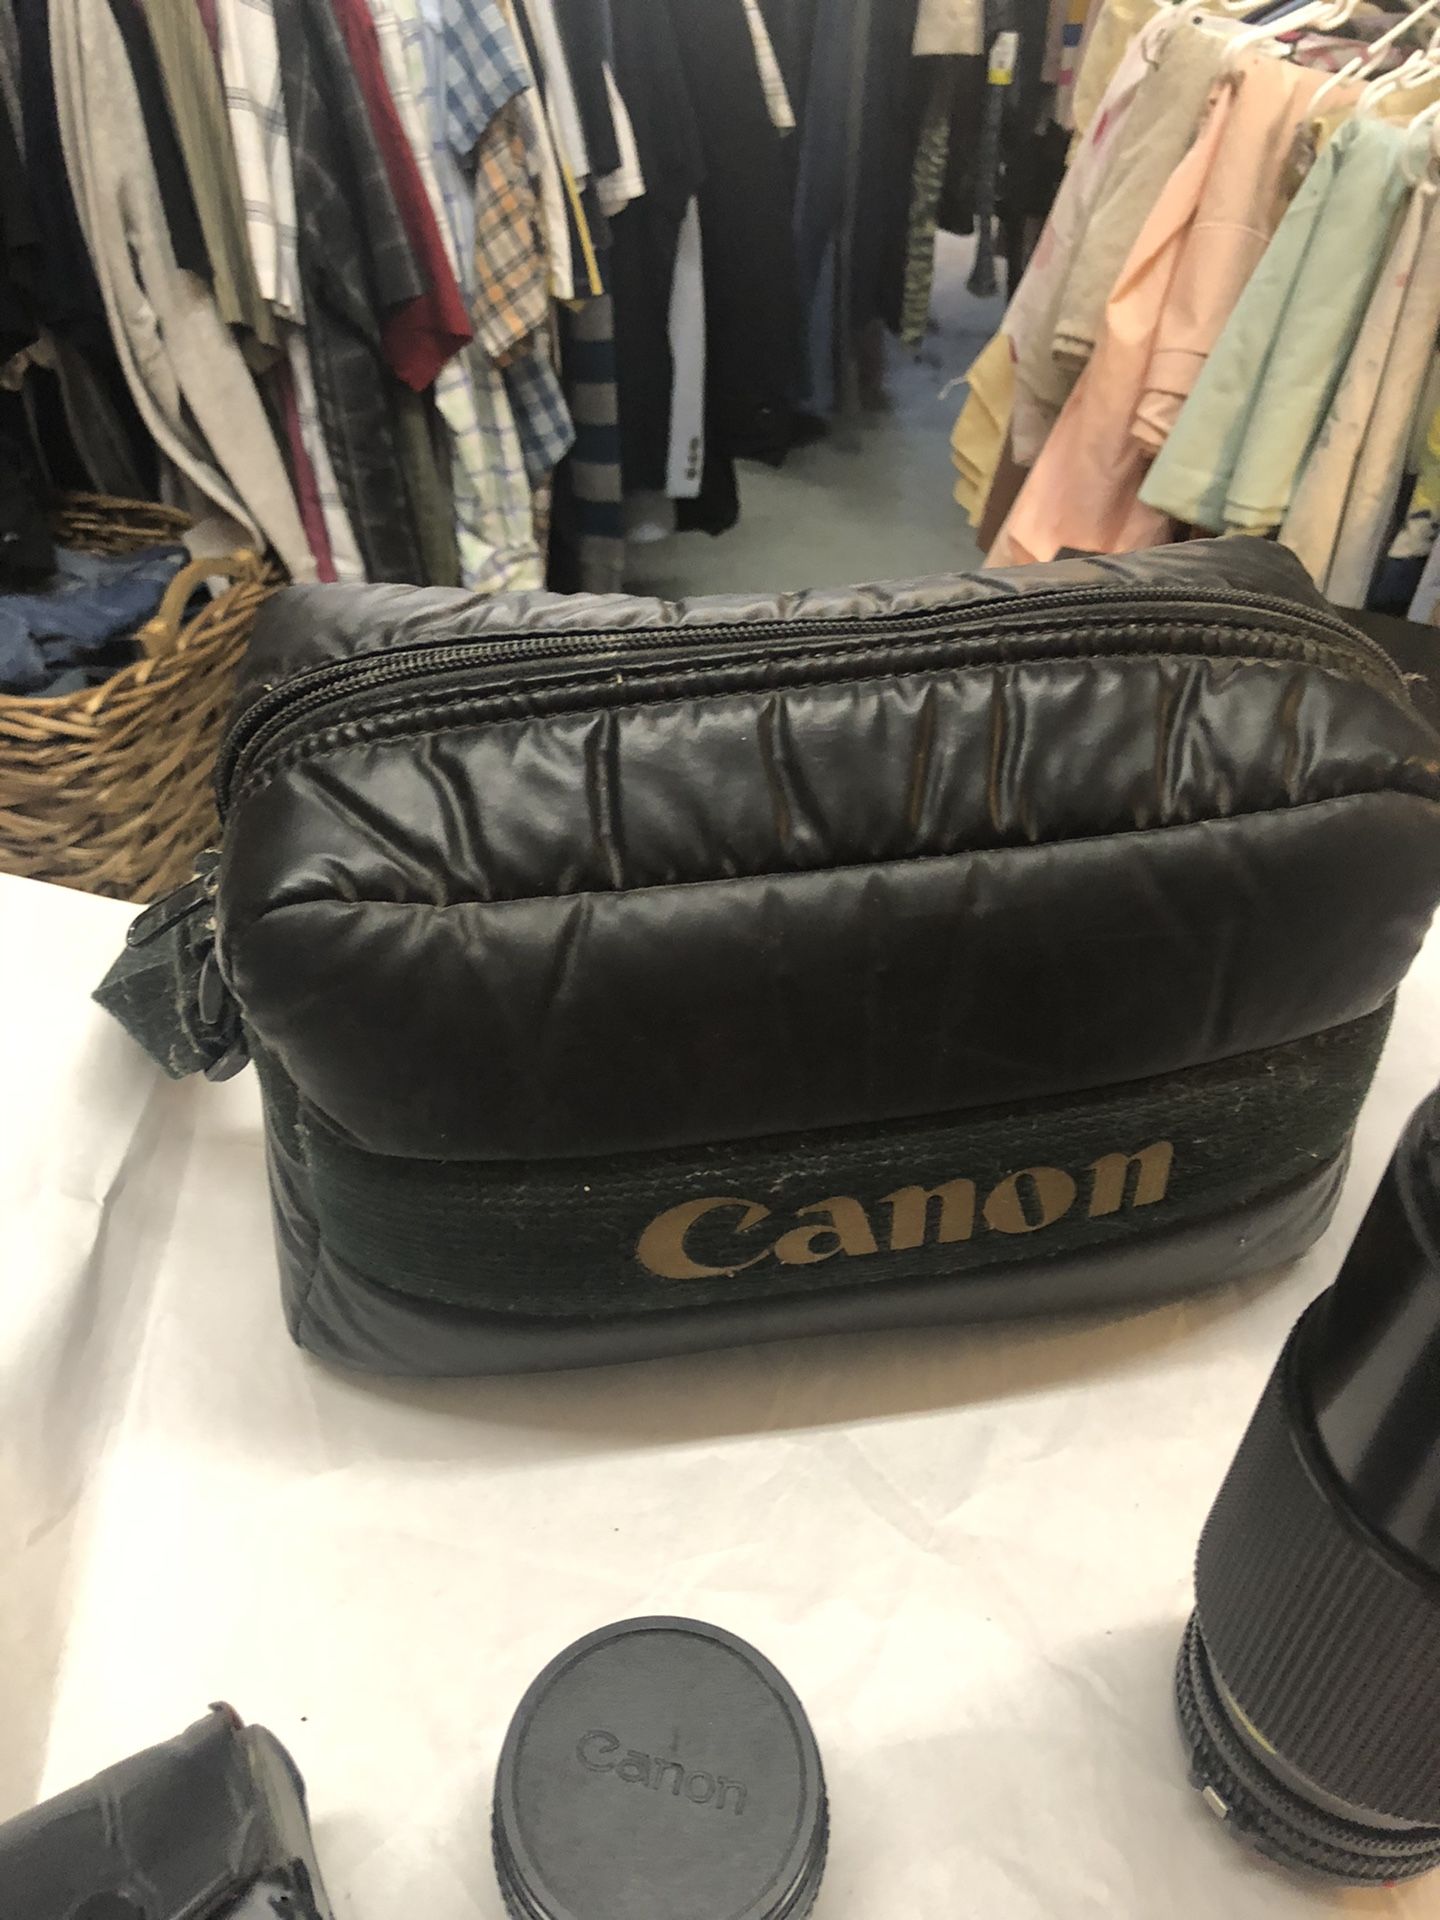 Canon AE-1 Lenses, Electric Power Winder, and Camera Bag